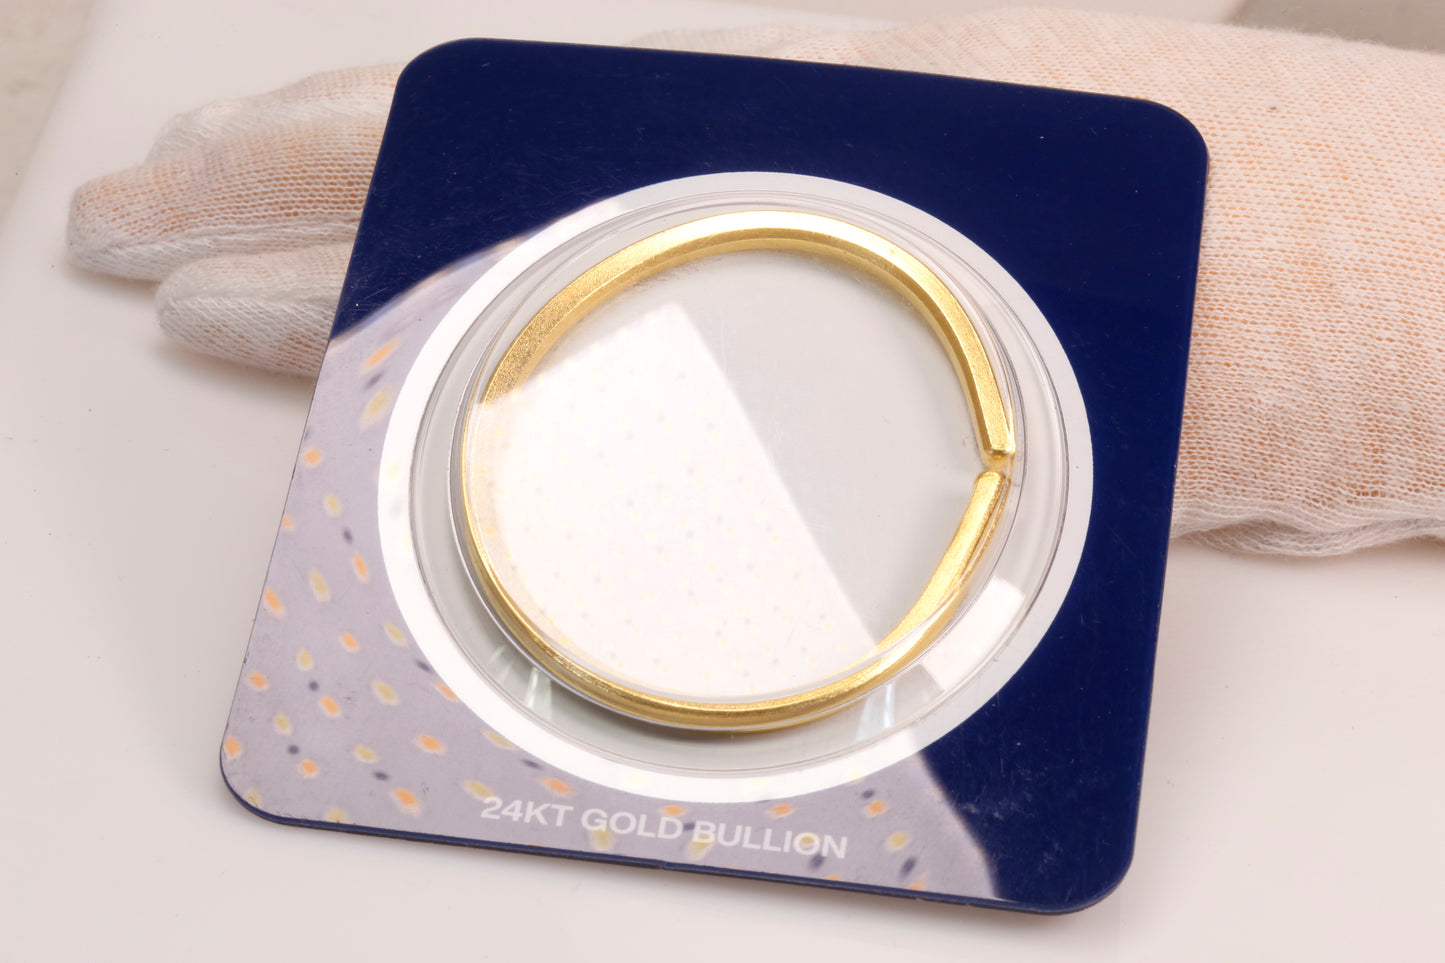 24K Gold Bangle 1 Troy Oz. Sealed in Security Case Re: S6731